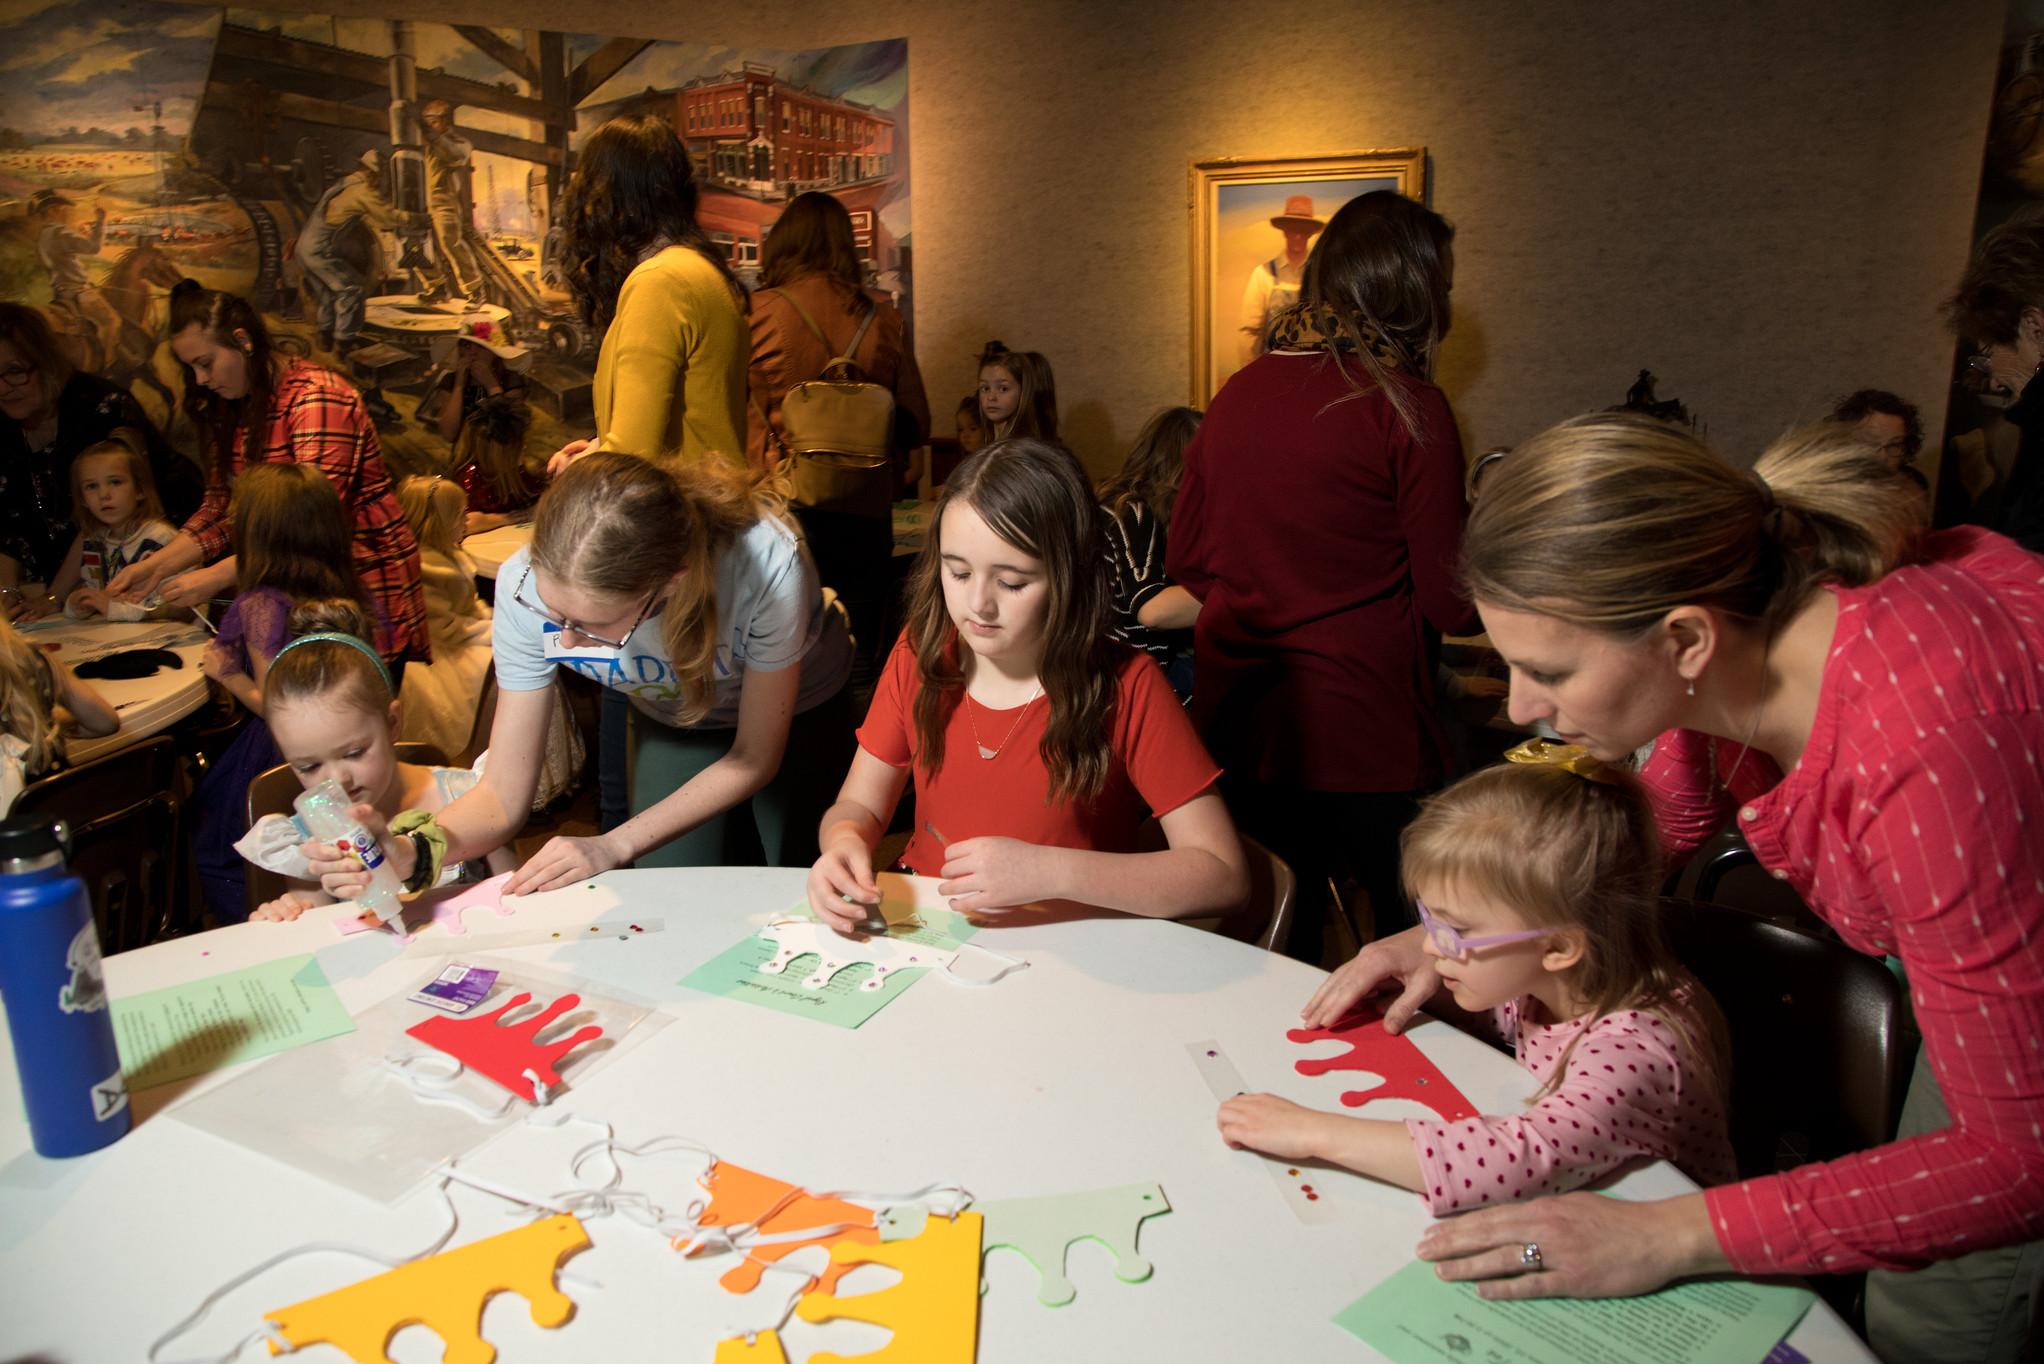 The Shafer Gallery hosts an event for young children